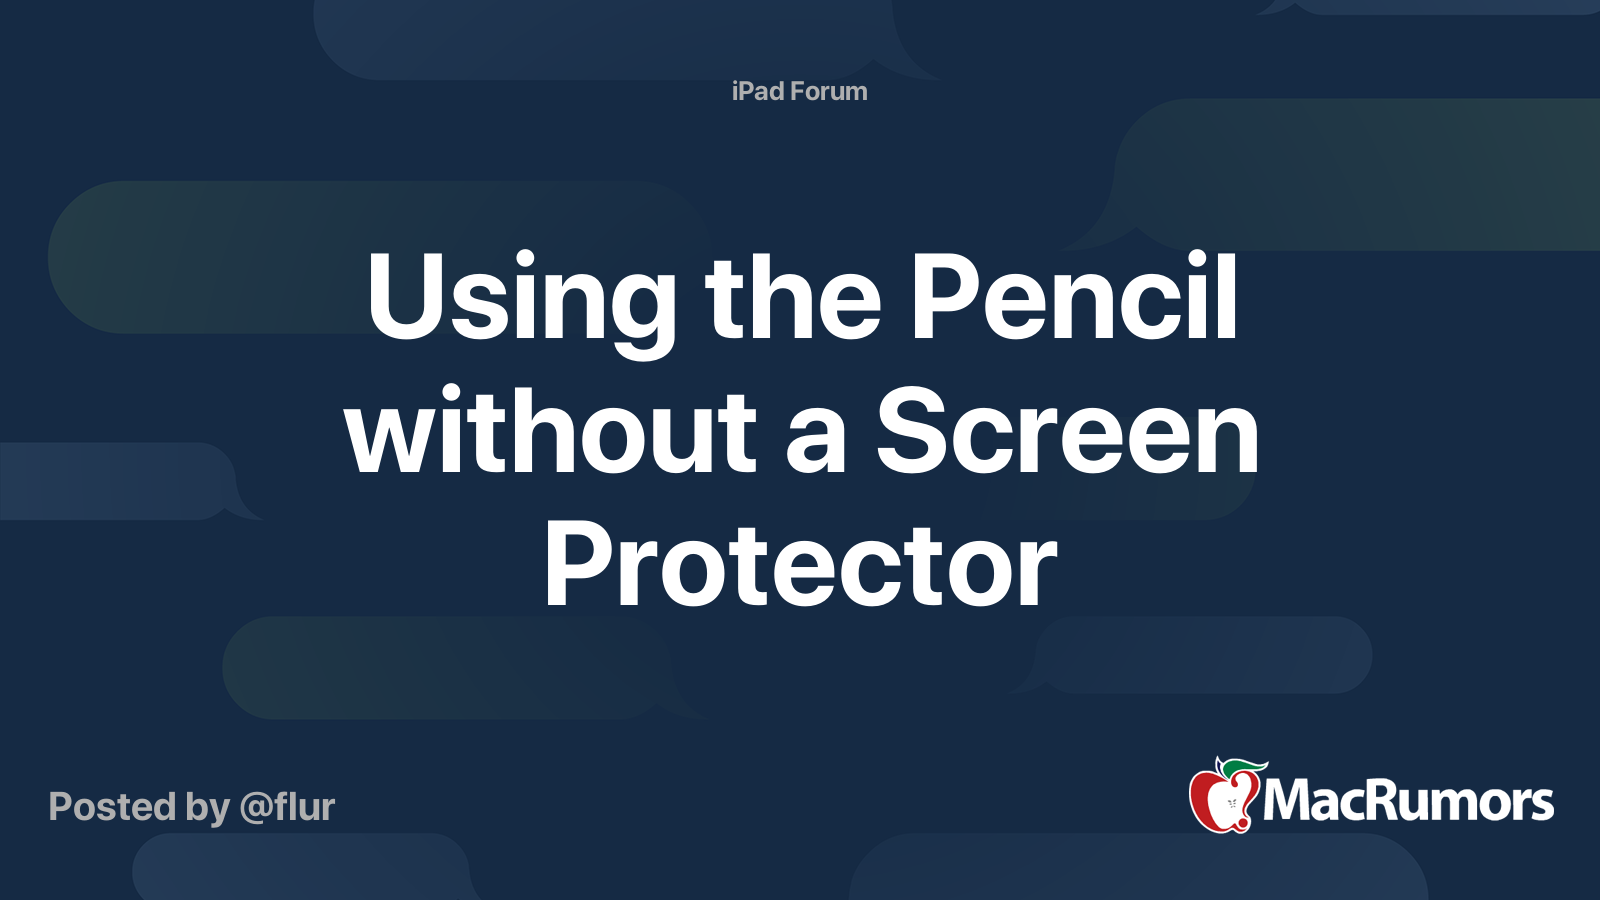 Should you use Apple Pencil without screen protector?